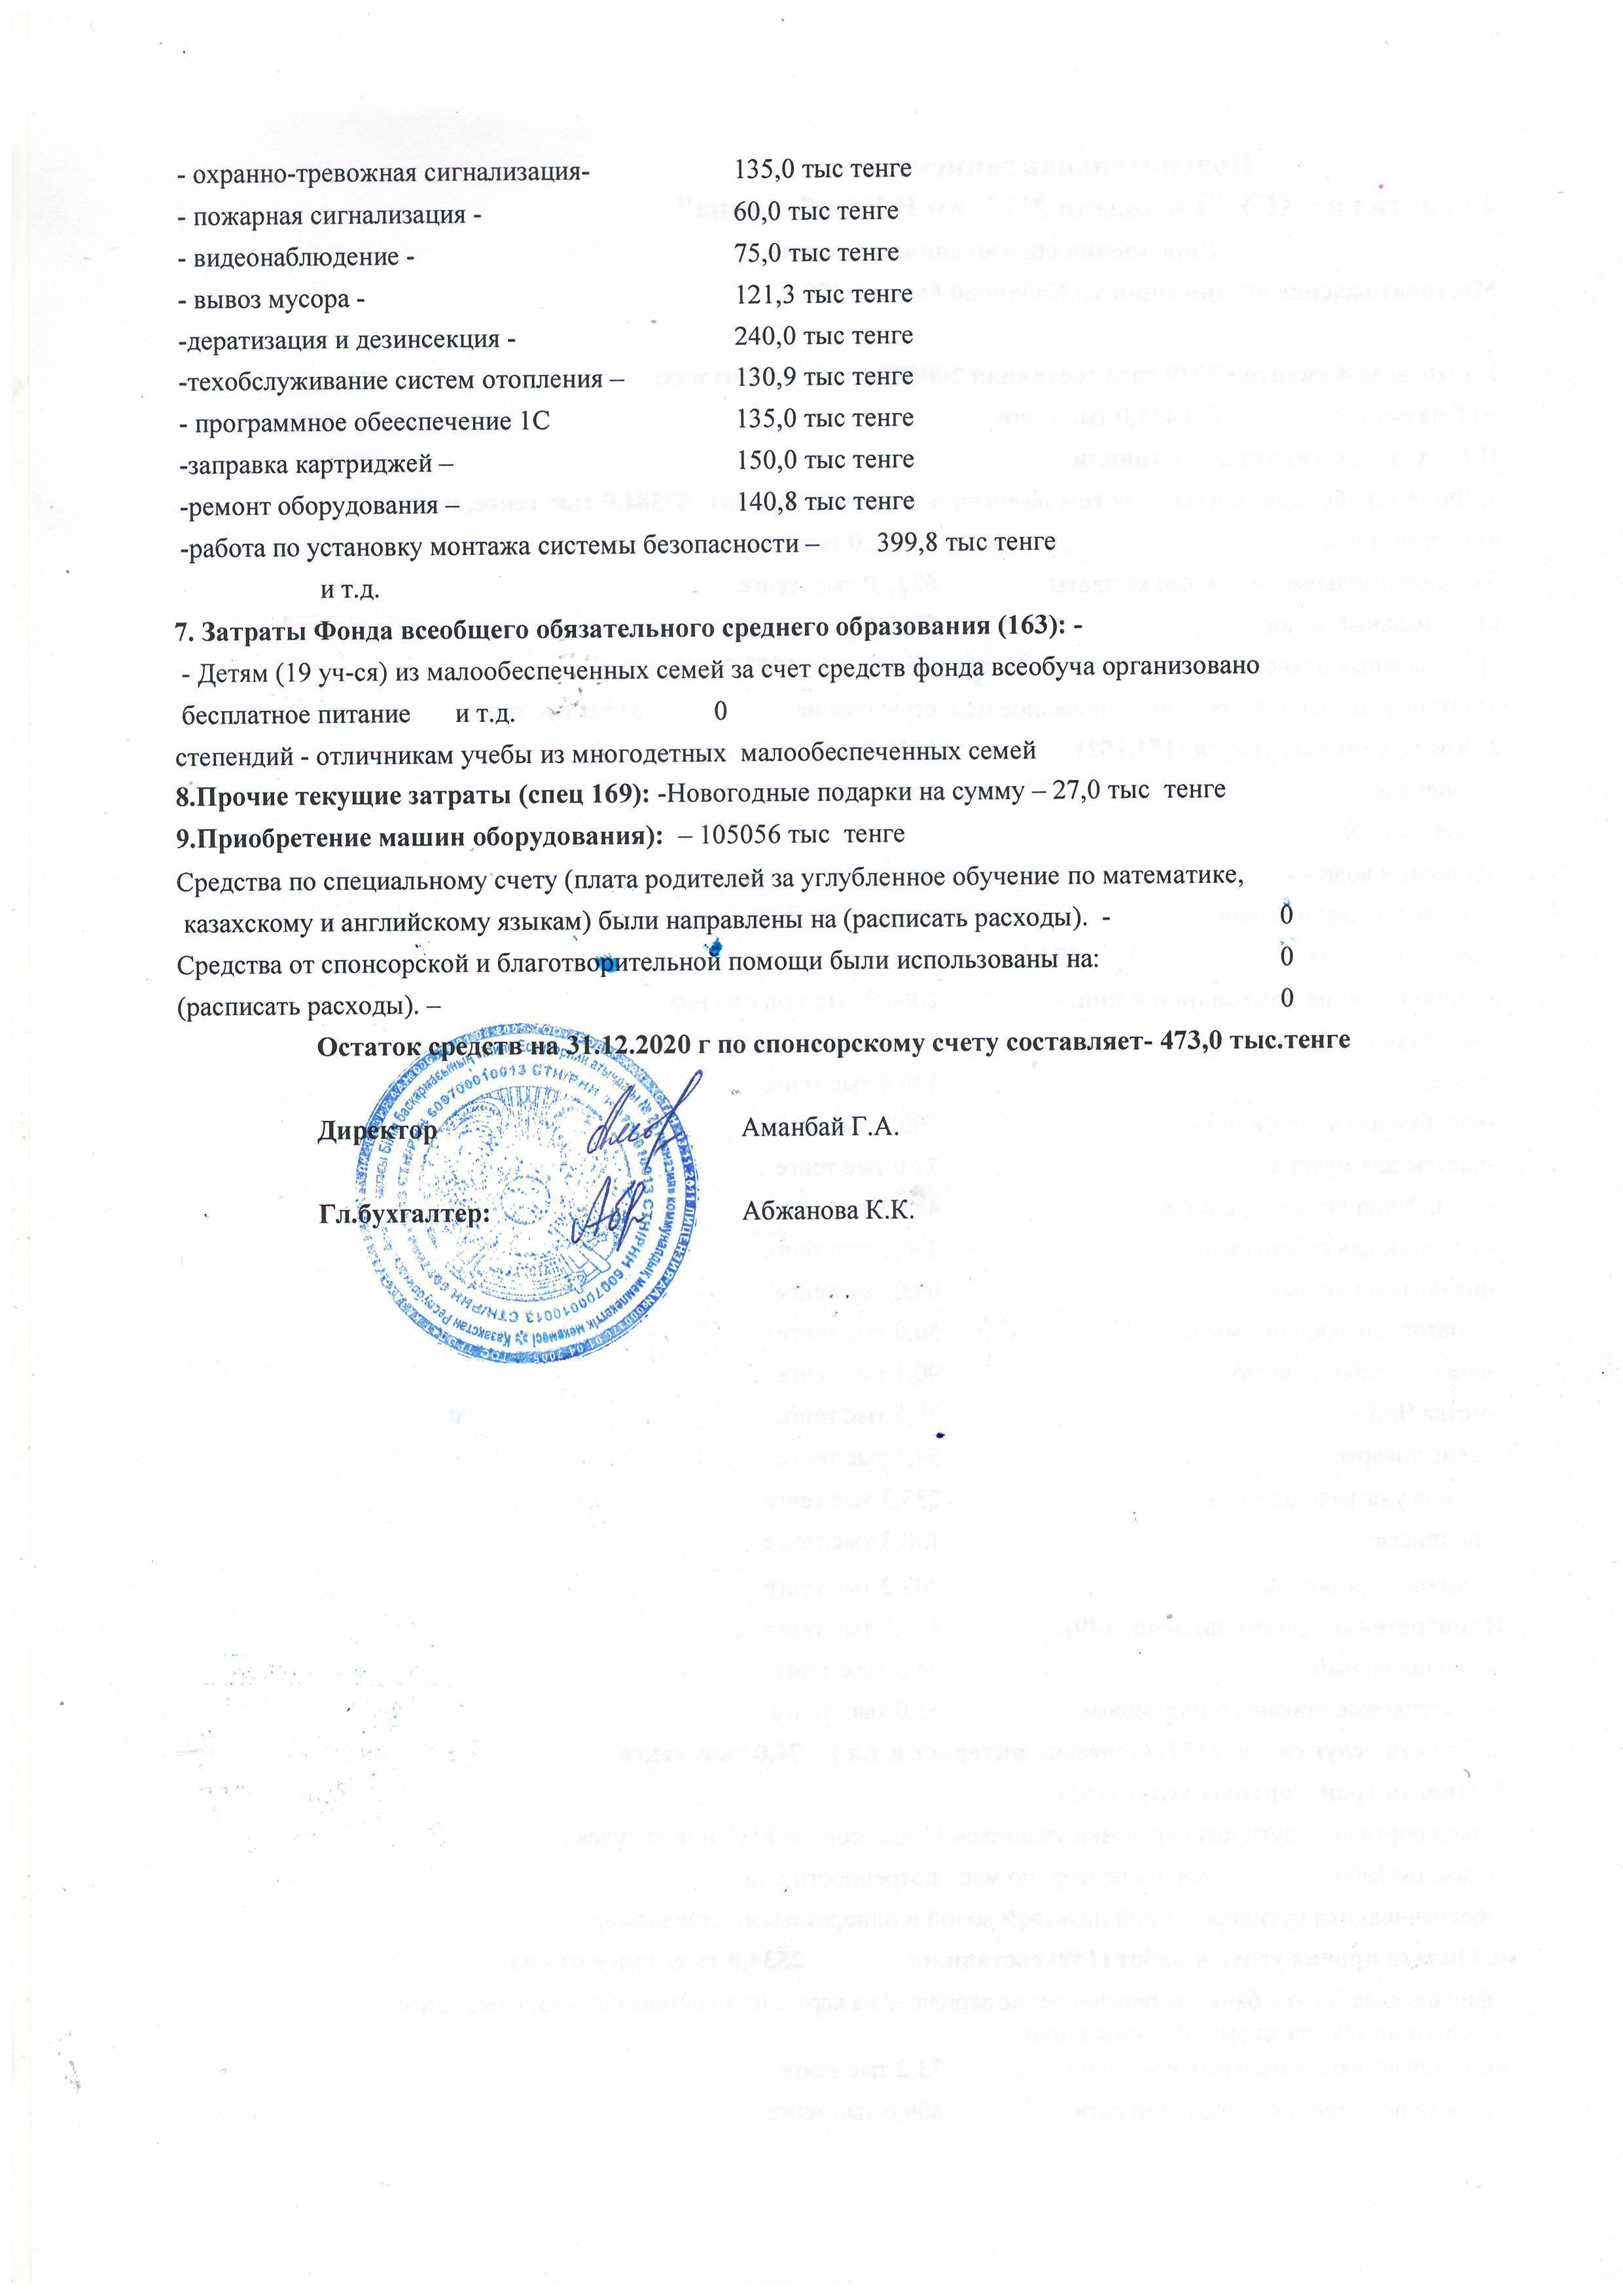 Statement of income and expenses за 4 квартал